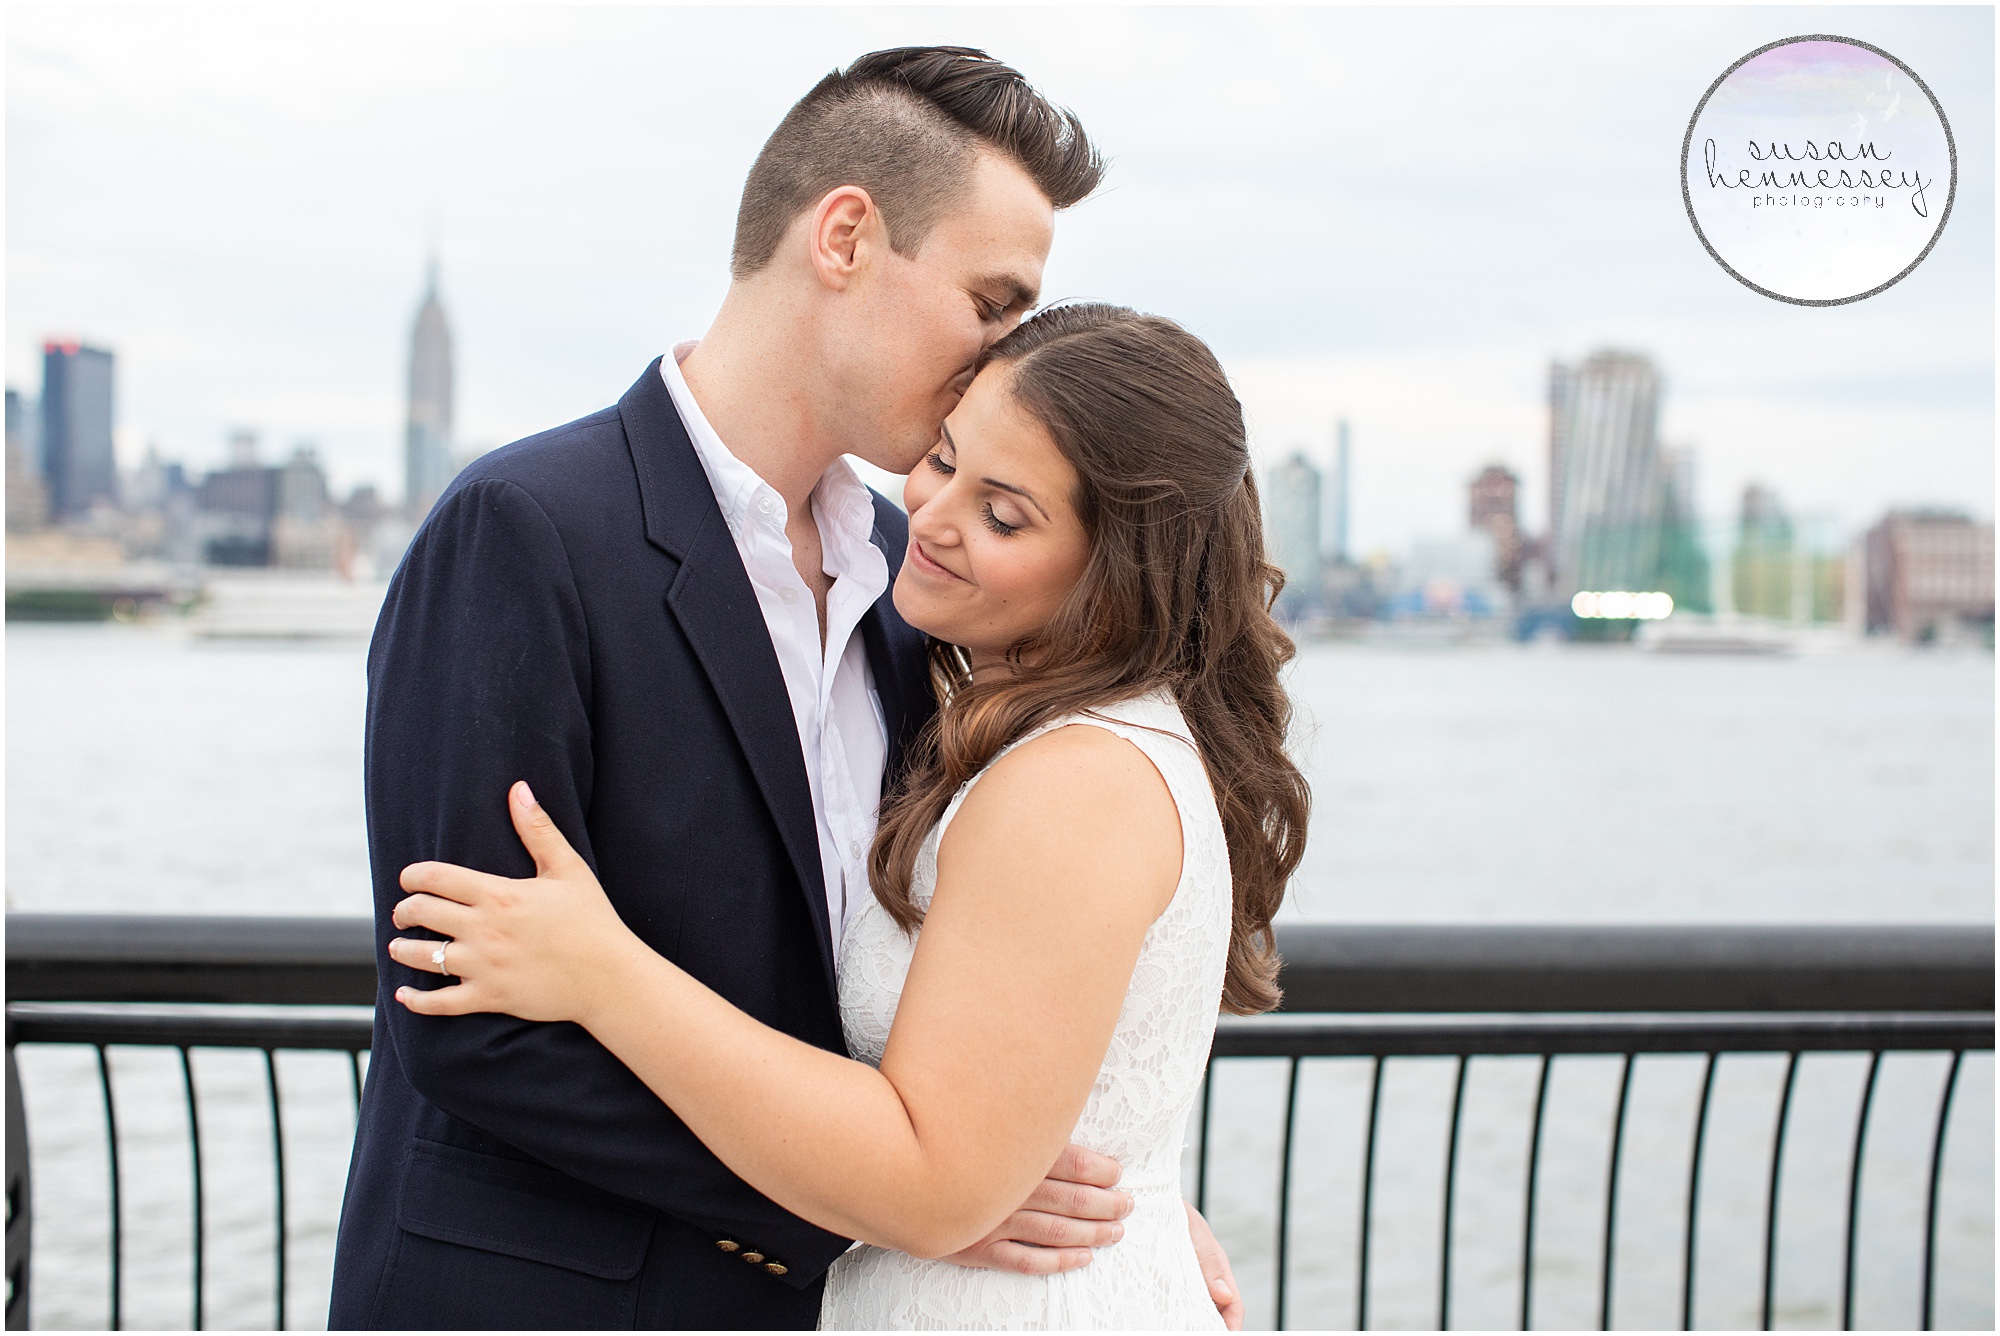 An engaged couple on the Hoboken waterfront